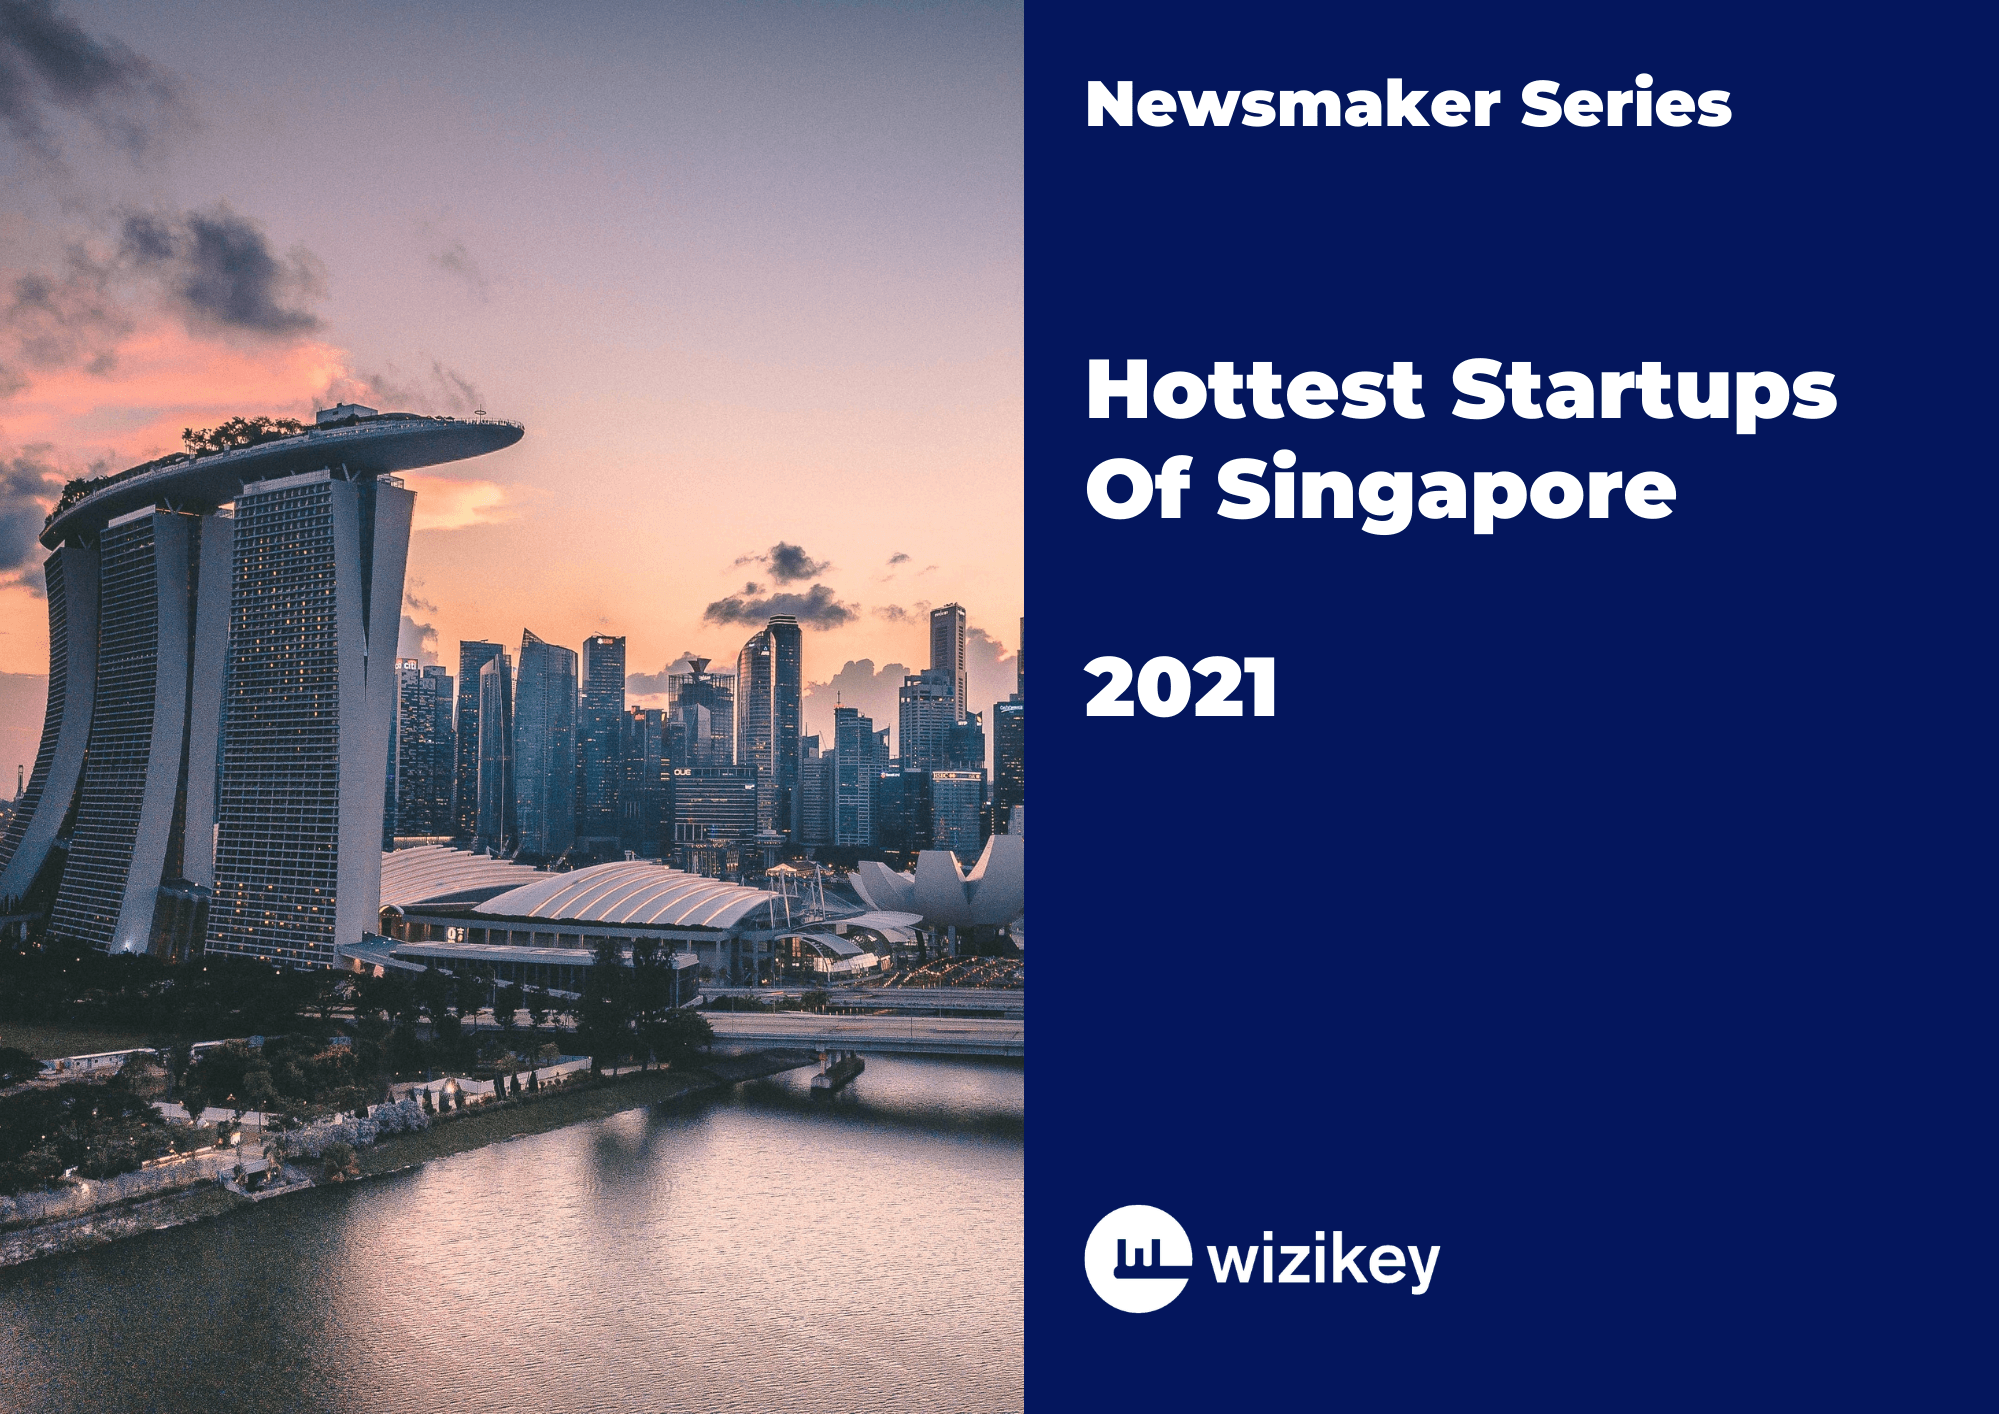 Hottest Startups of Singapore 2021